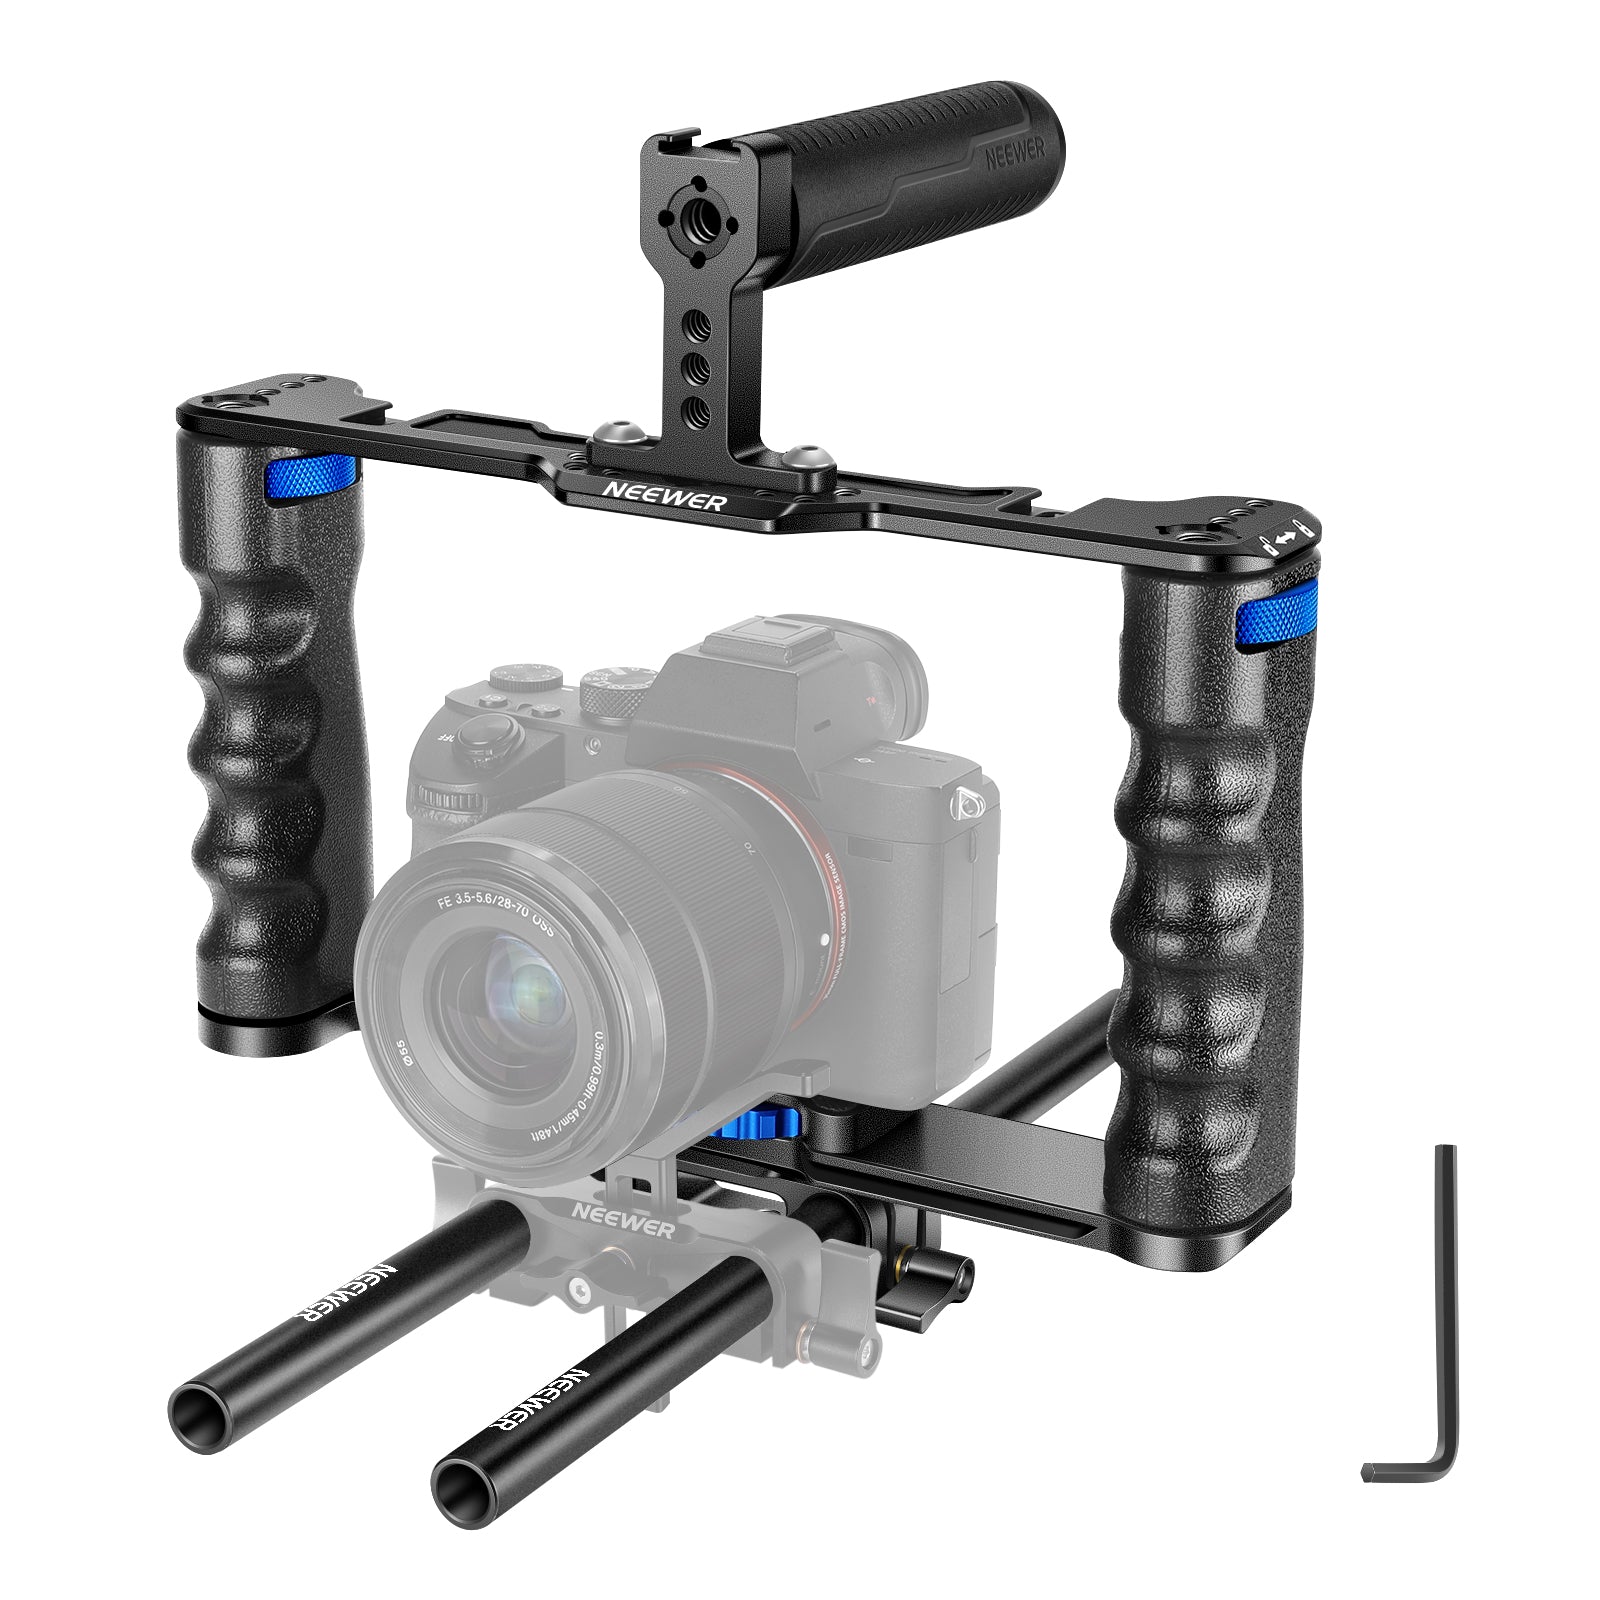  NEEWER ZV-E10 Camera Cage Compatible with Sony ZV-E10,  Aluminum Video Shooting Cage Rig with Arca Type QR Plate, 1/4 Threads,  Cold Shoe Mounts Compatible with SmallRig Top Handles Video Rigs